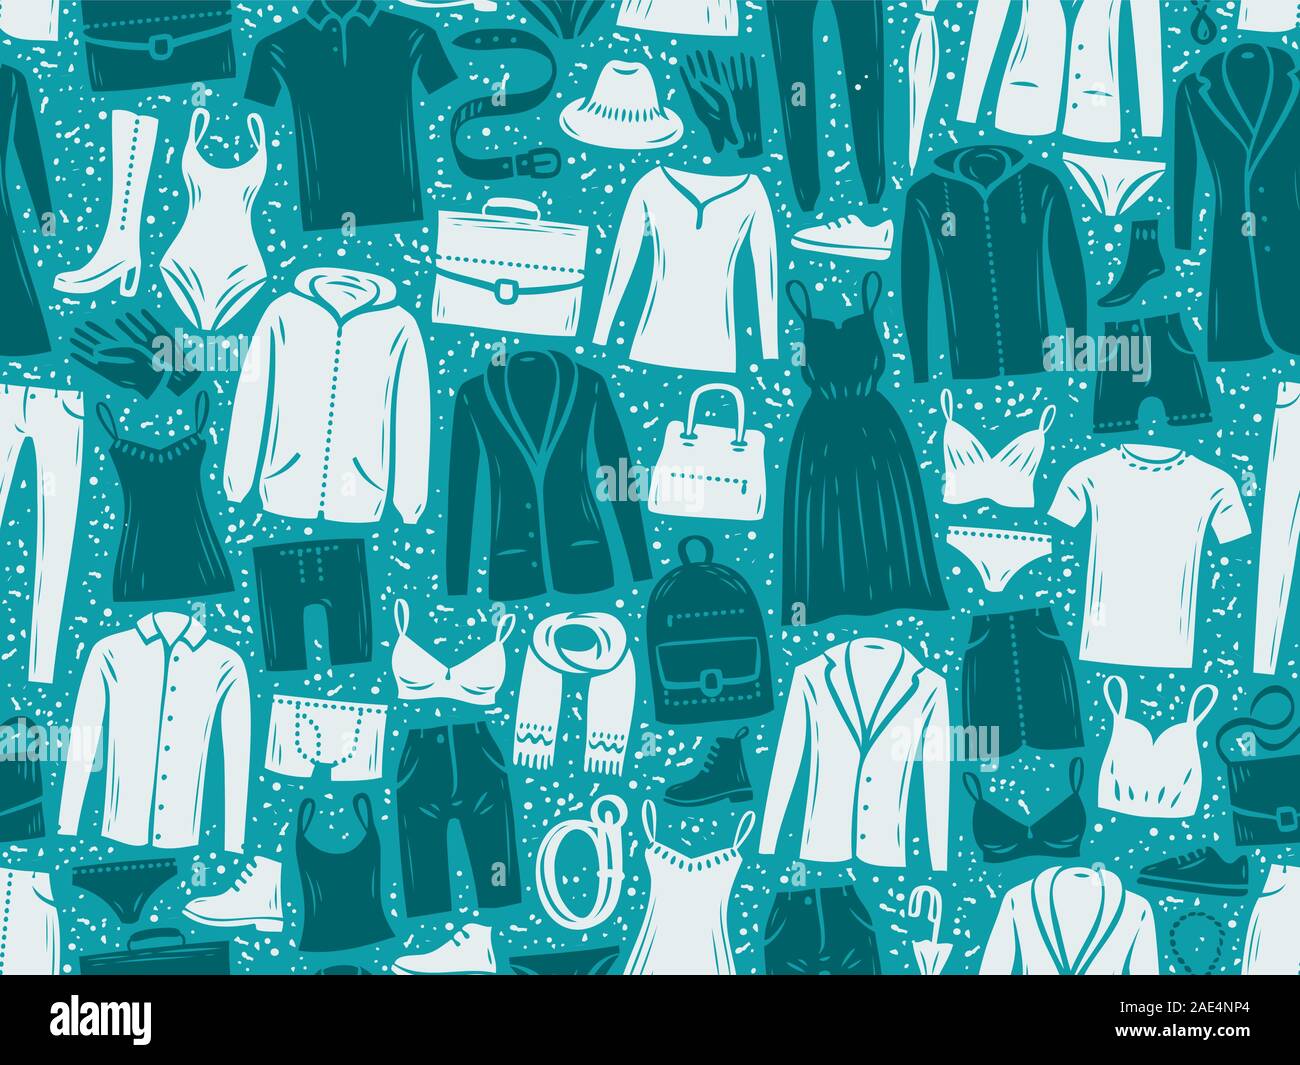 Fashion seamless background or pattern. Clothes vector illustration Stock Vector